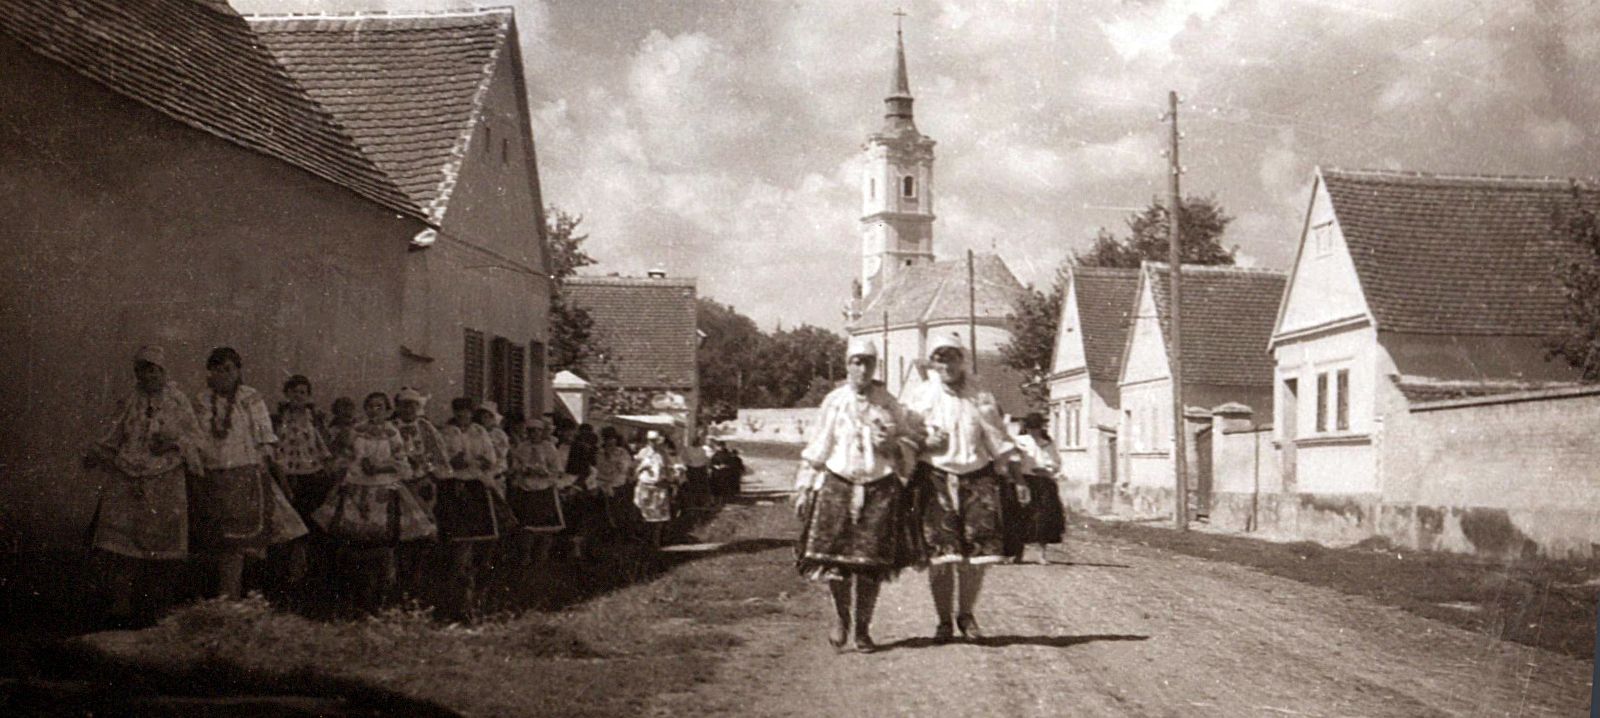 <font style="color:red"> ŠOKAC PEOPLE OF MOHACS </font>